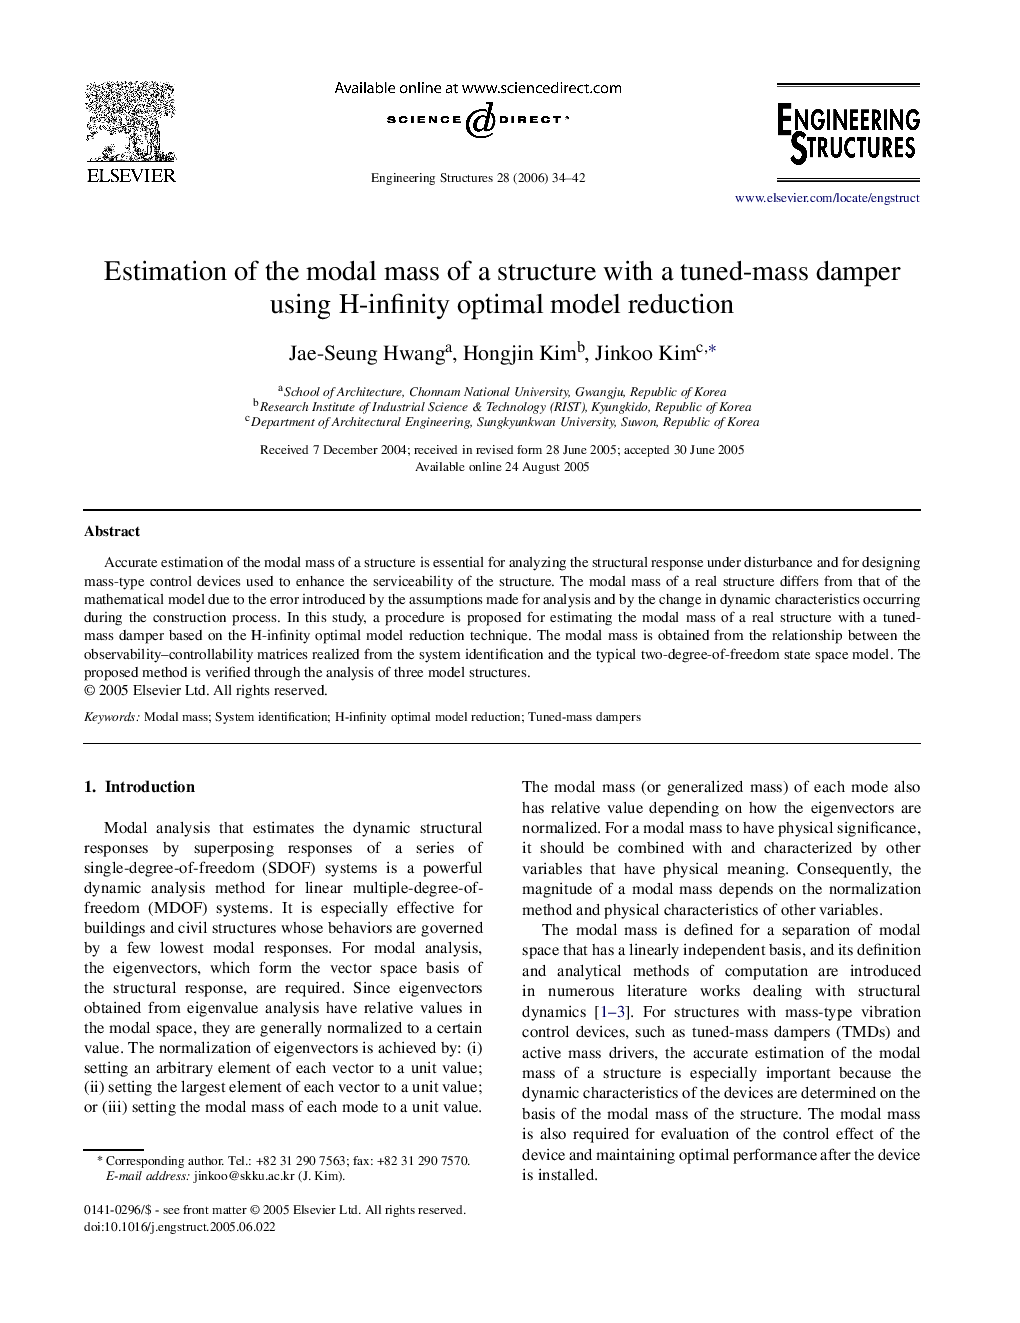 Estimation of the modal mass of a structure with a tuned-mass damper using H-infinity optimal model reduction